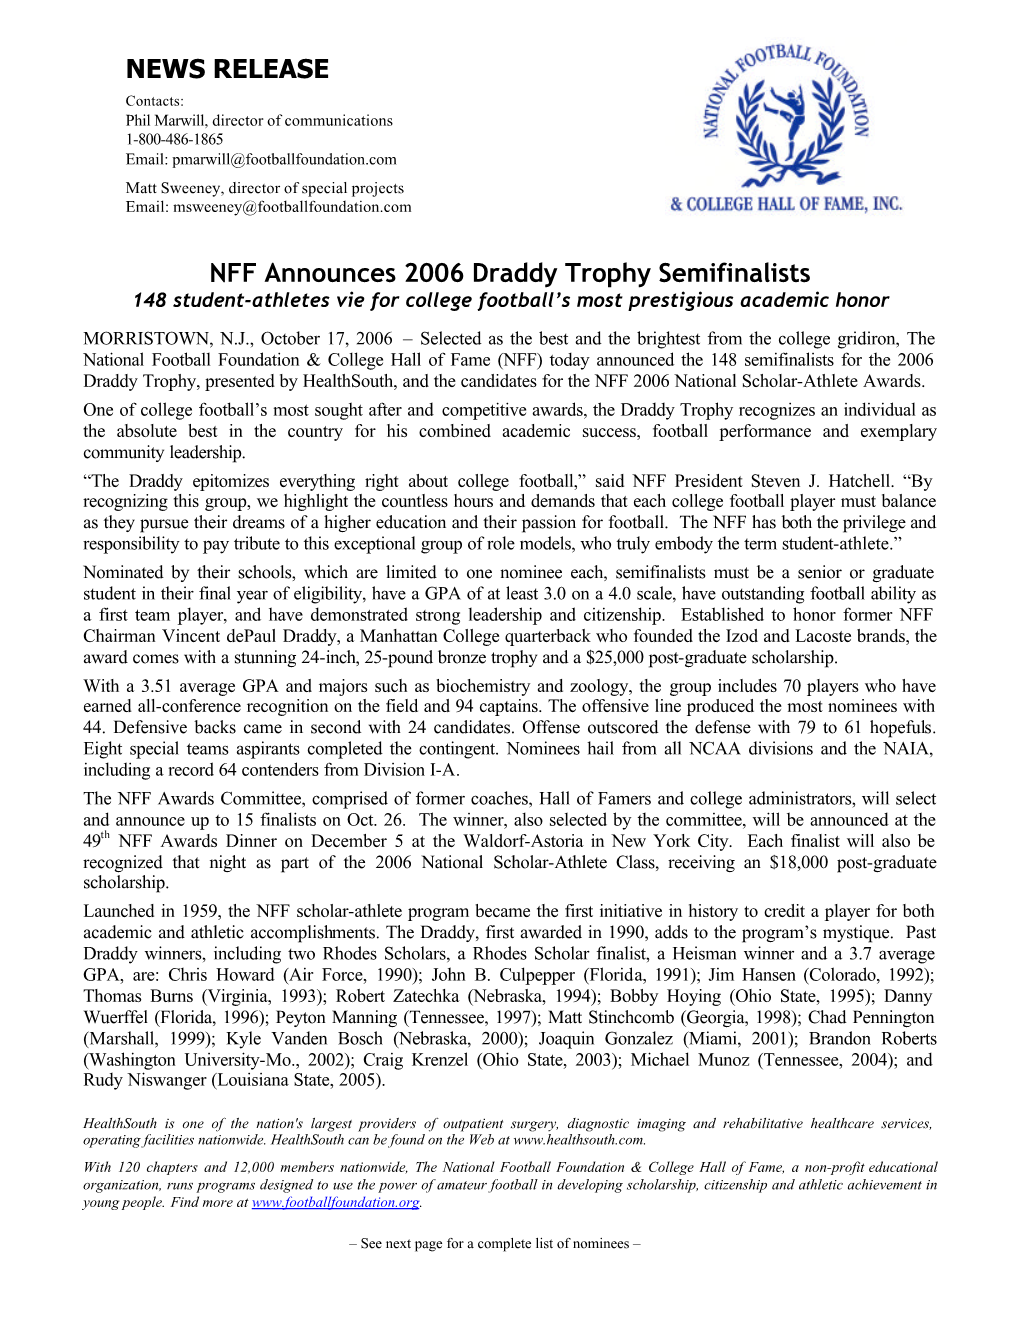 NFF Announces 2006 Draddy Trophy Semifinalists NEWS RELEASE